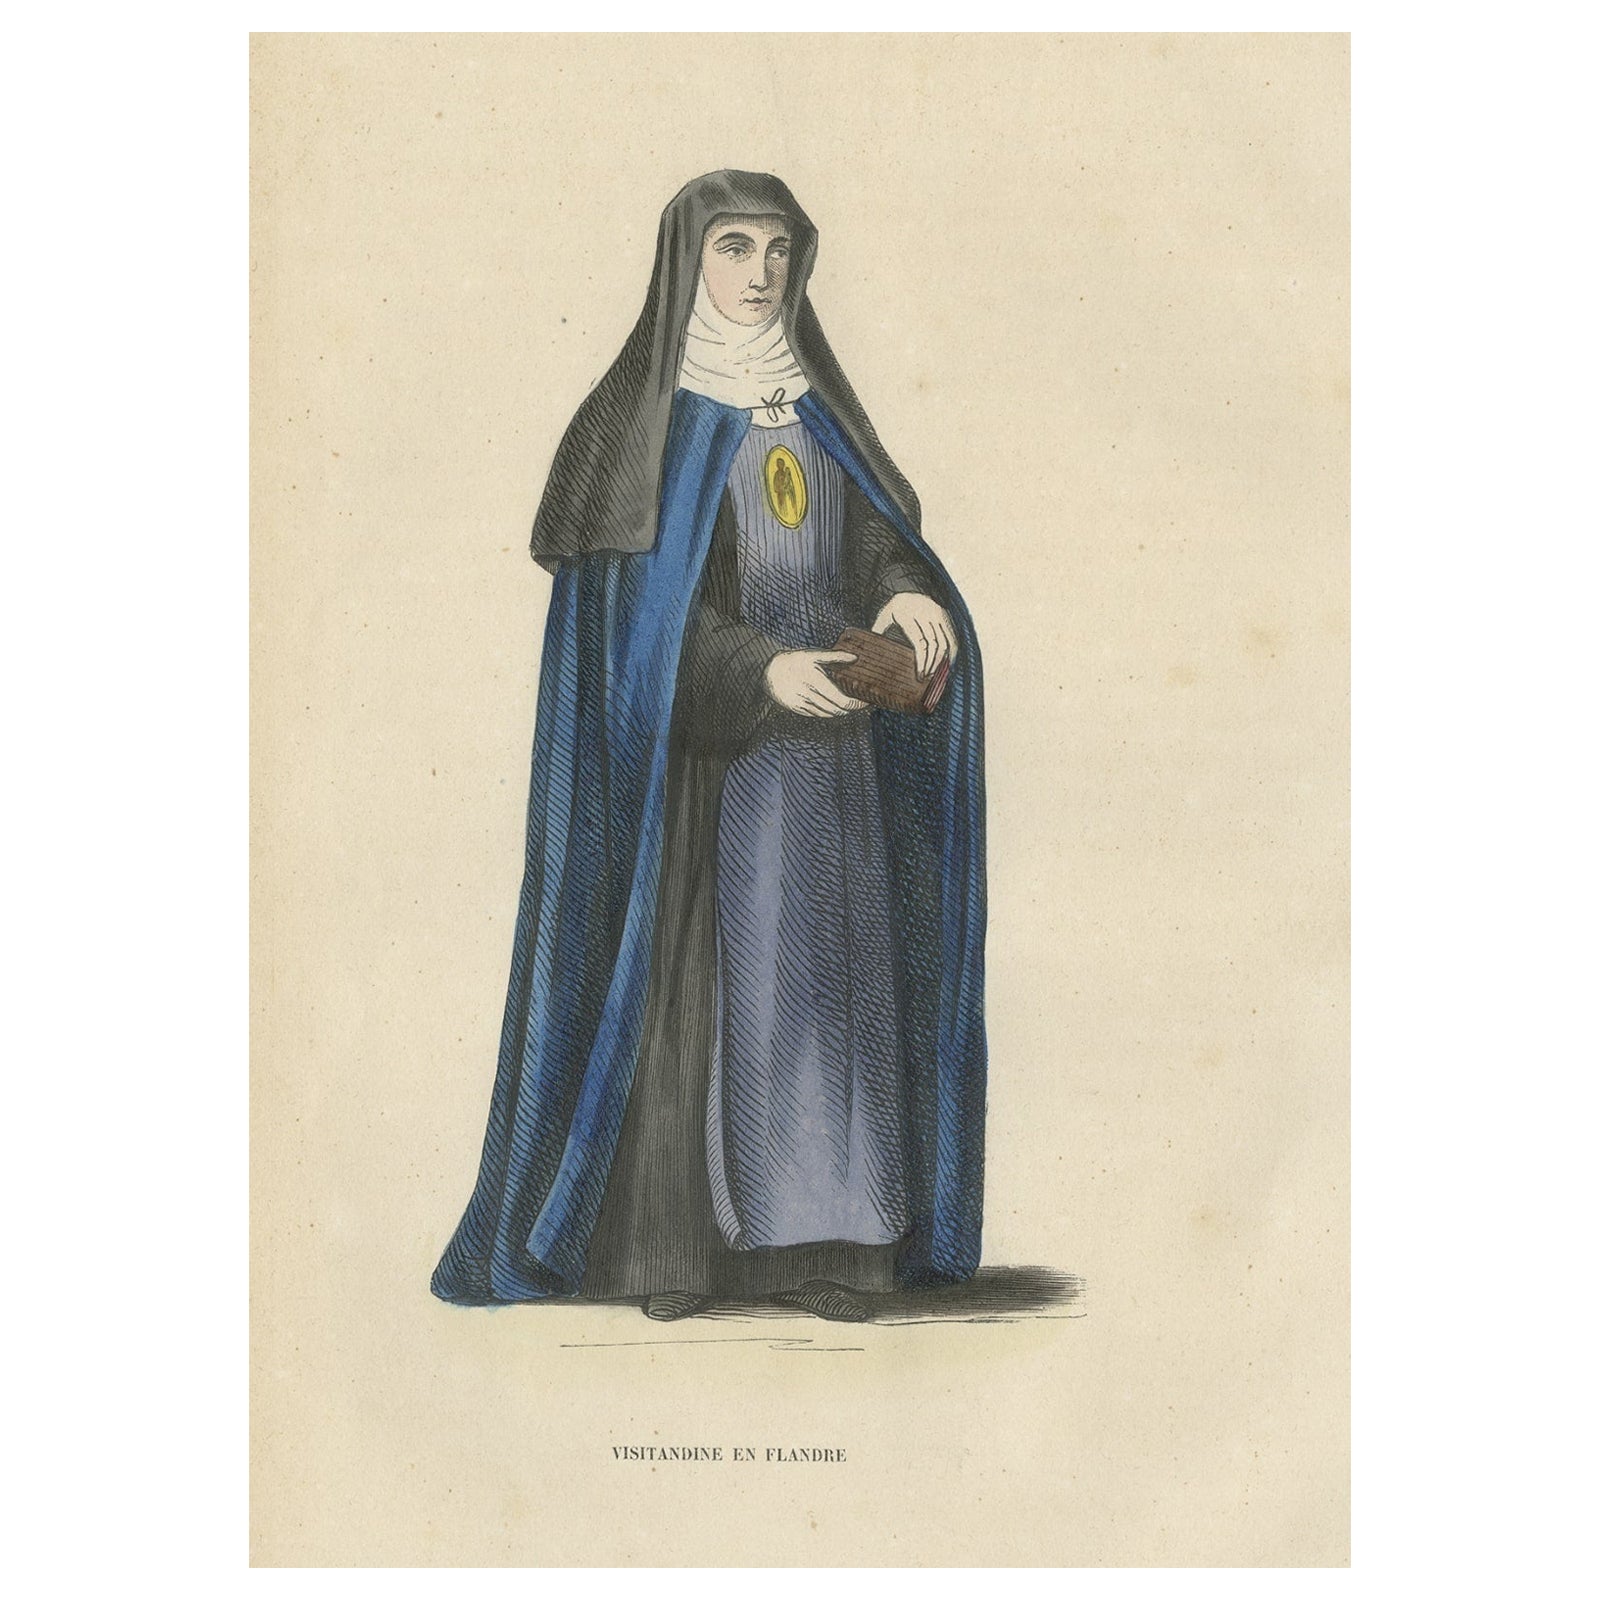 Antique Print of a Nun of Order of Visitation of Holy Mary in Flandres, Belgium For Sale